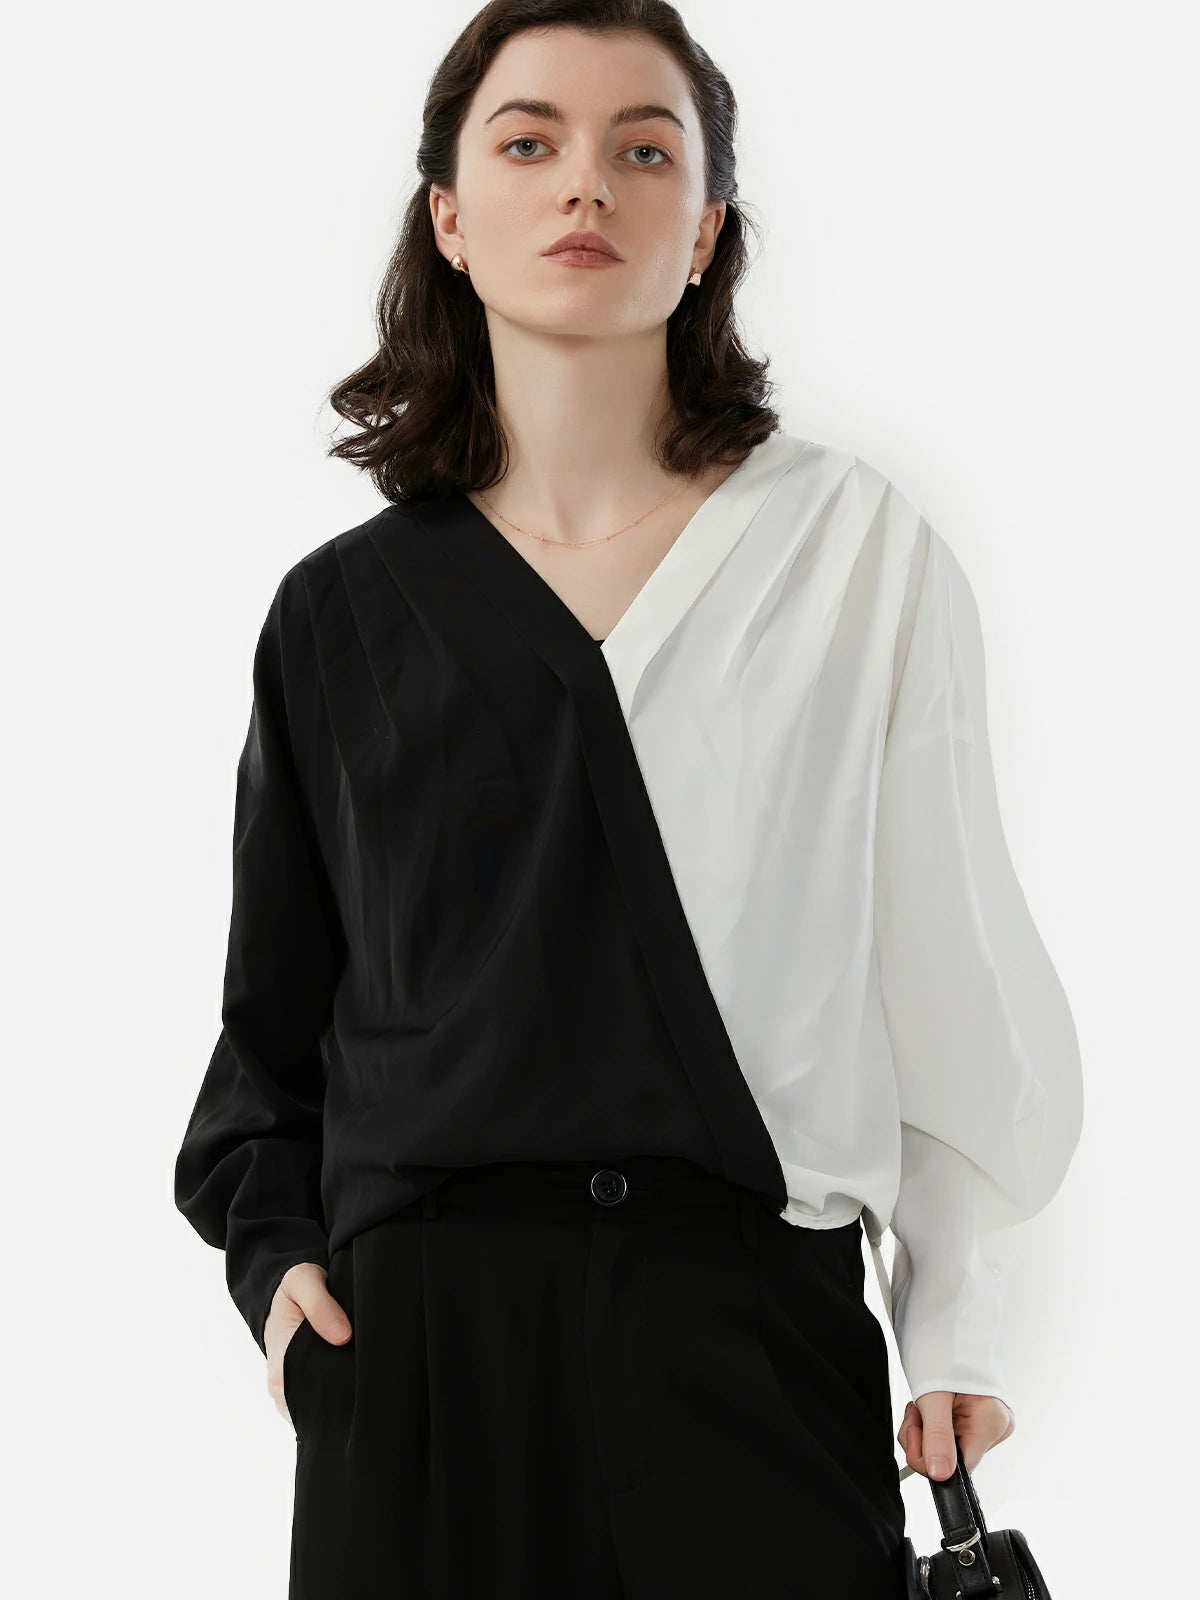 V-Neck Chiffon Blouse with Black and White Color-Block